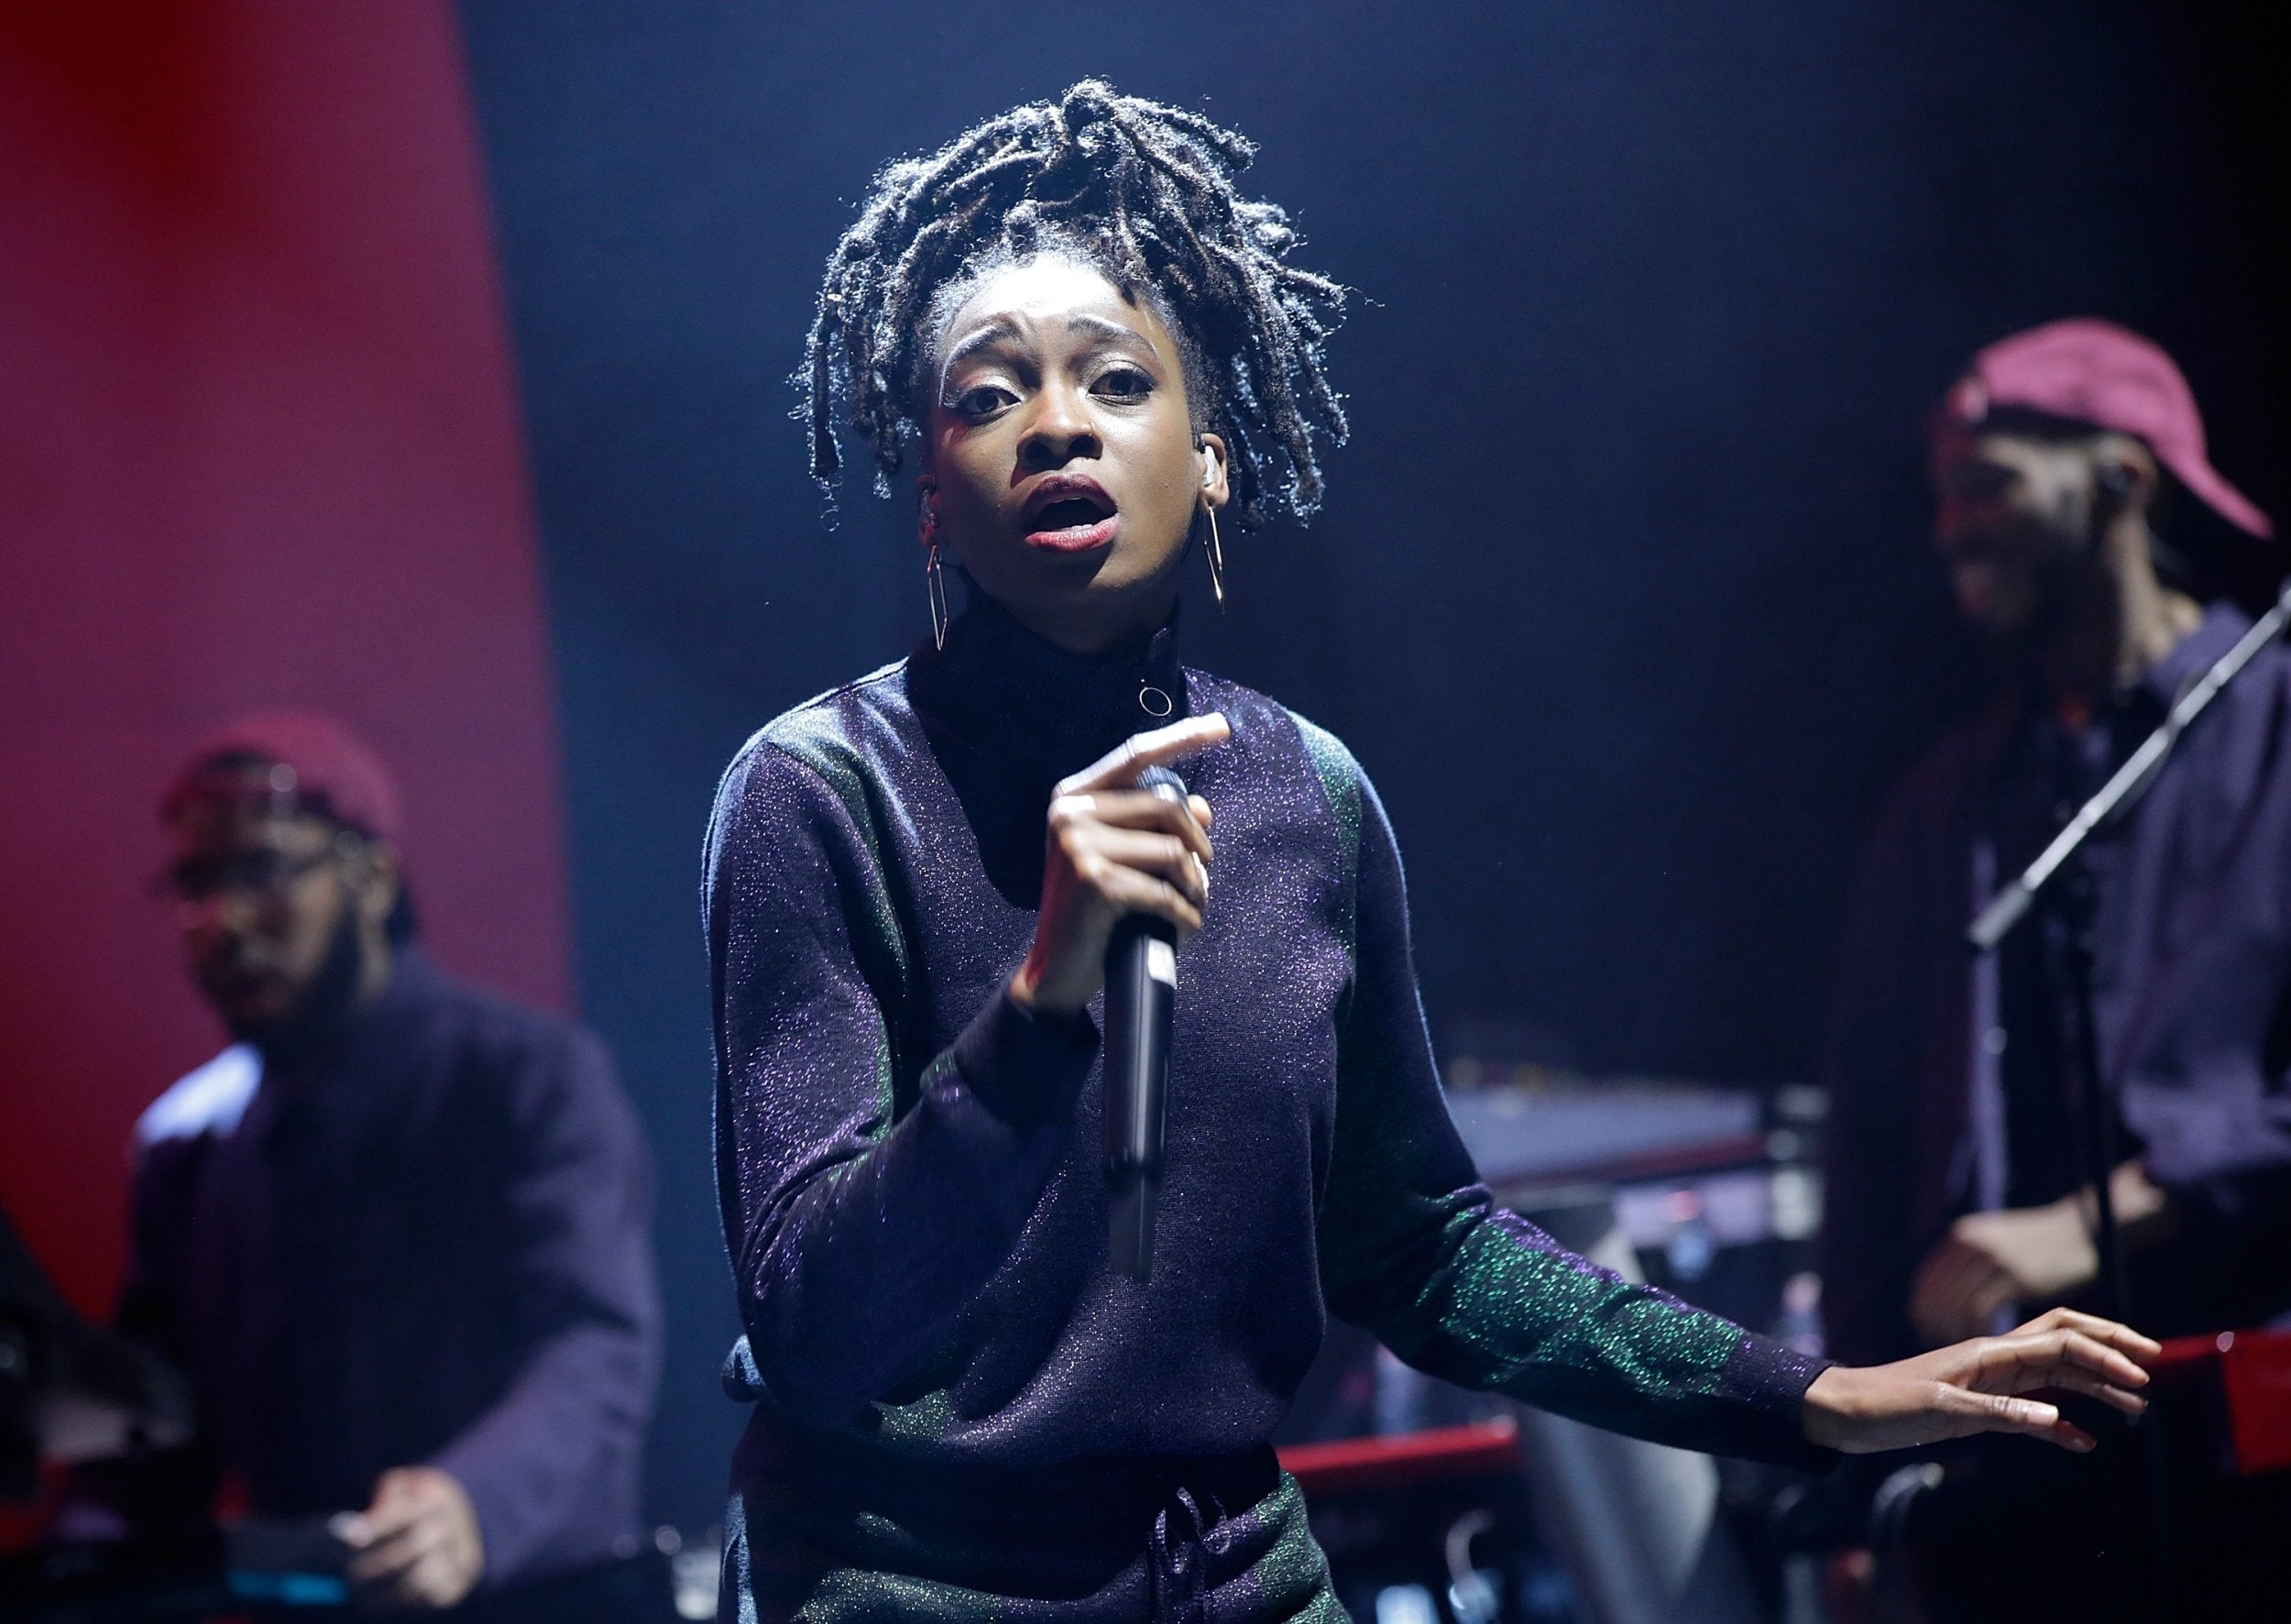 Little Simz is one of just two women among the 13 acts announced so far for TRNSMT festival